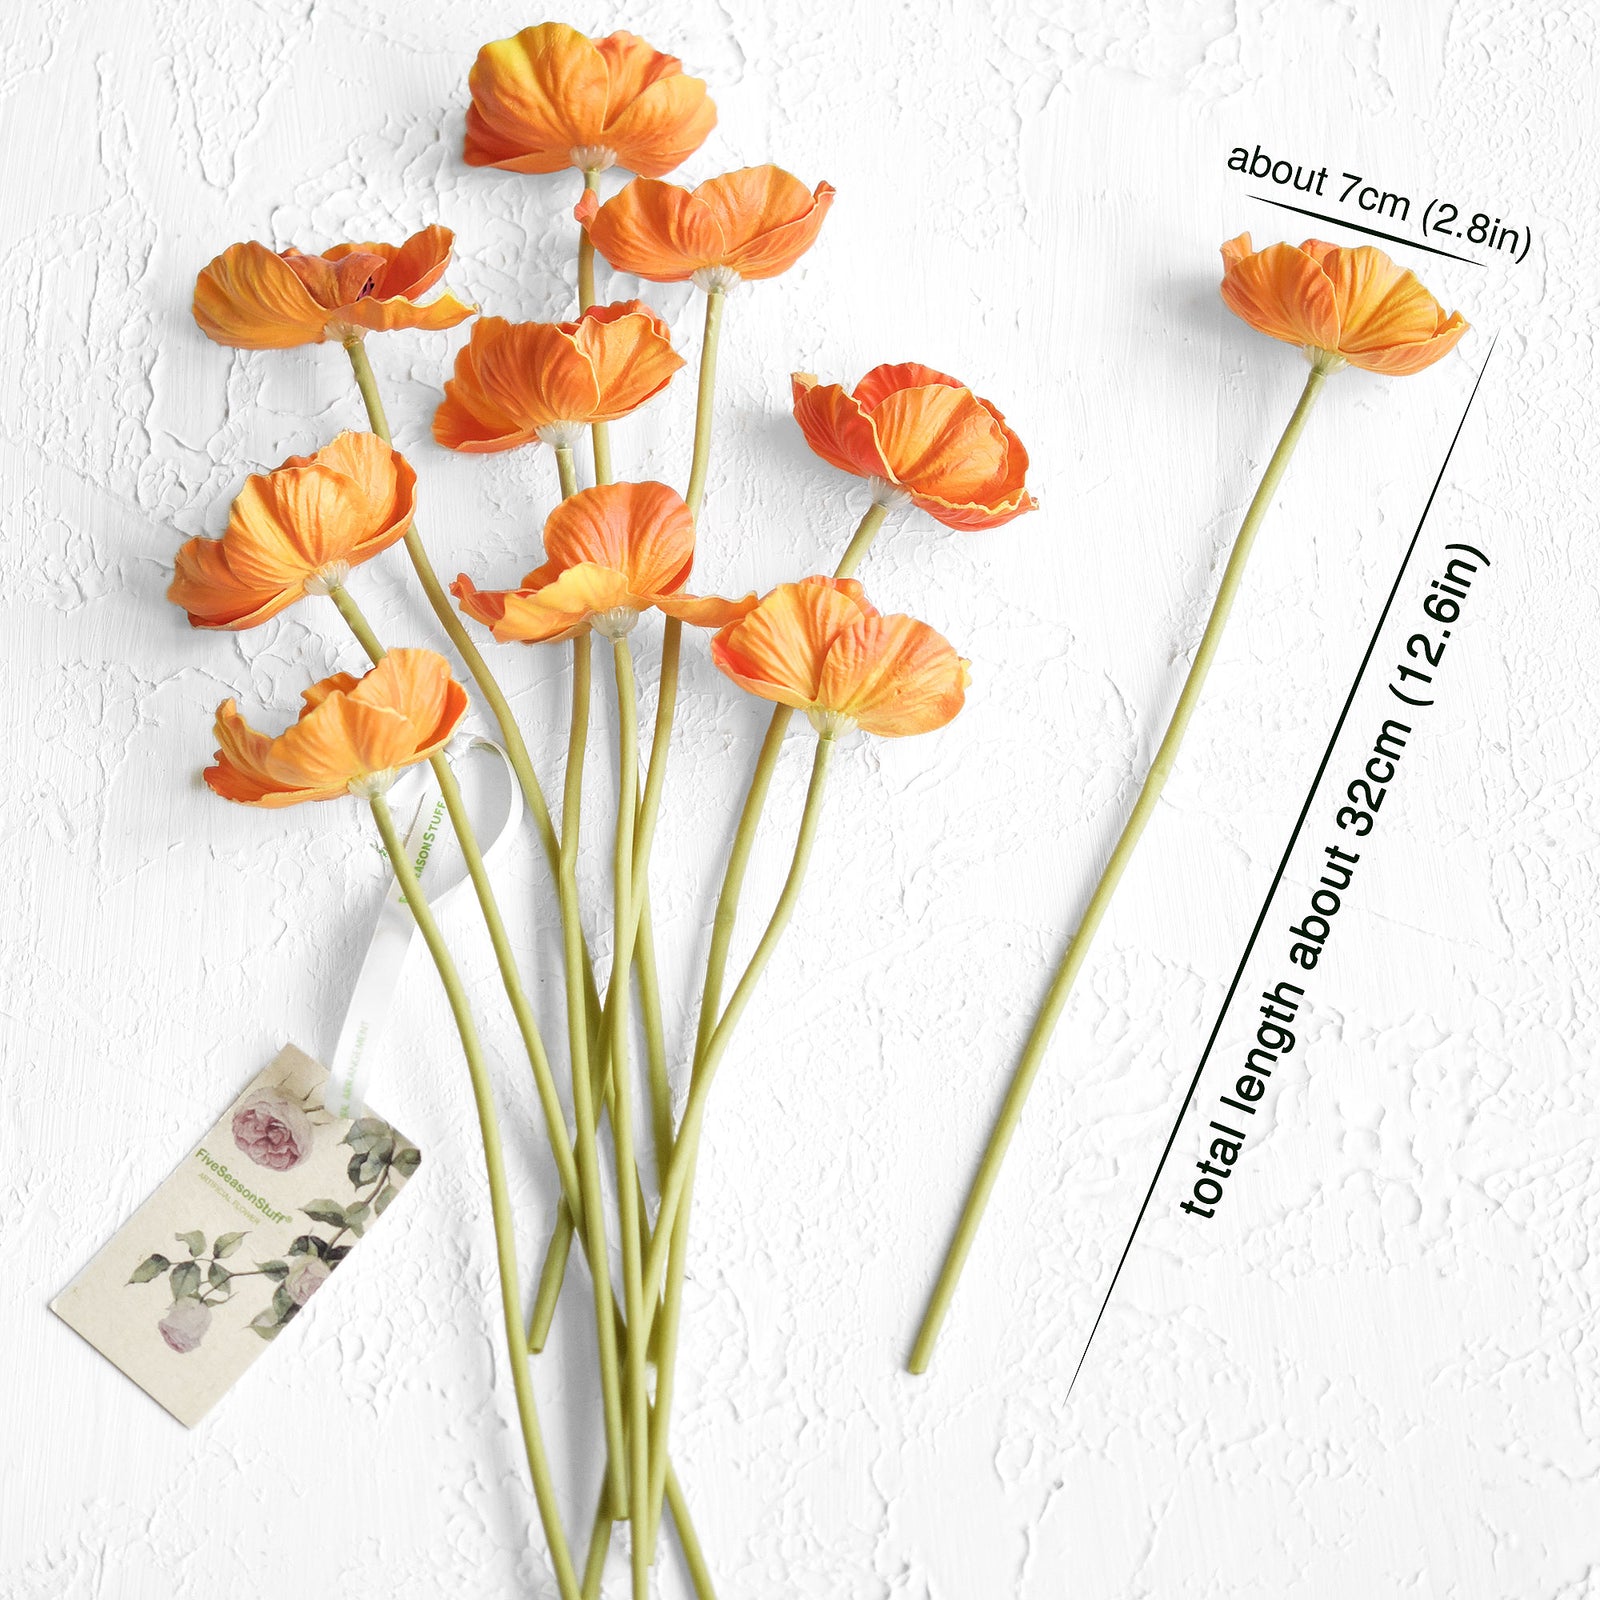 FiveSeasonStuff Orange Real Touch Artificial Poppy Flowers Remembrance Day Decorations 10 Stems 12.6'' (32cm)